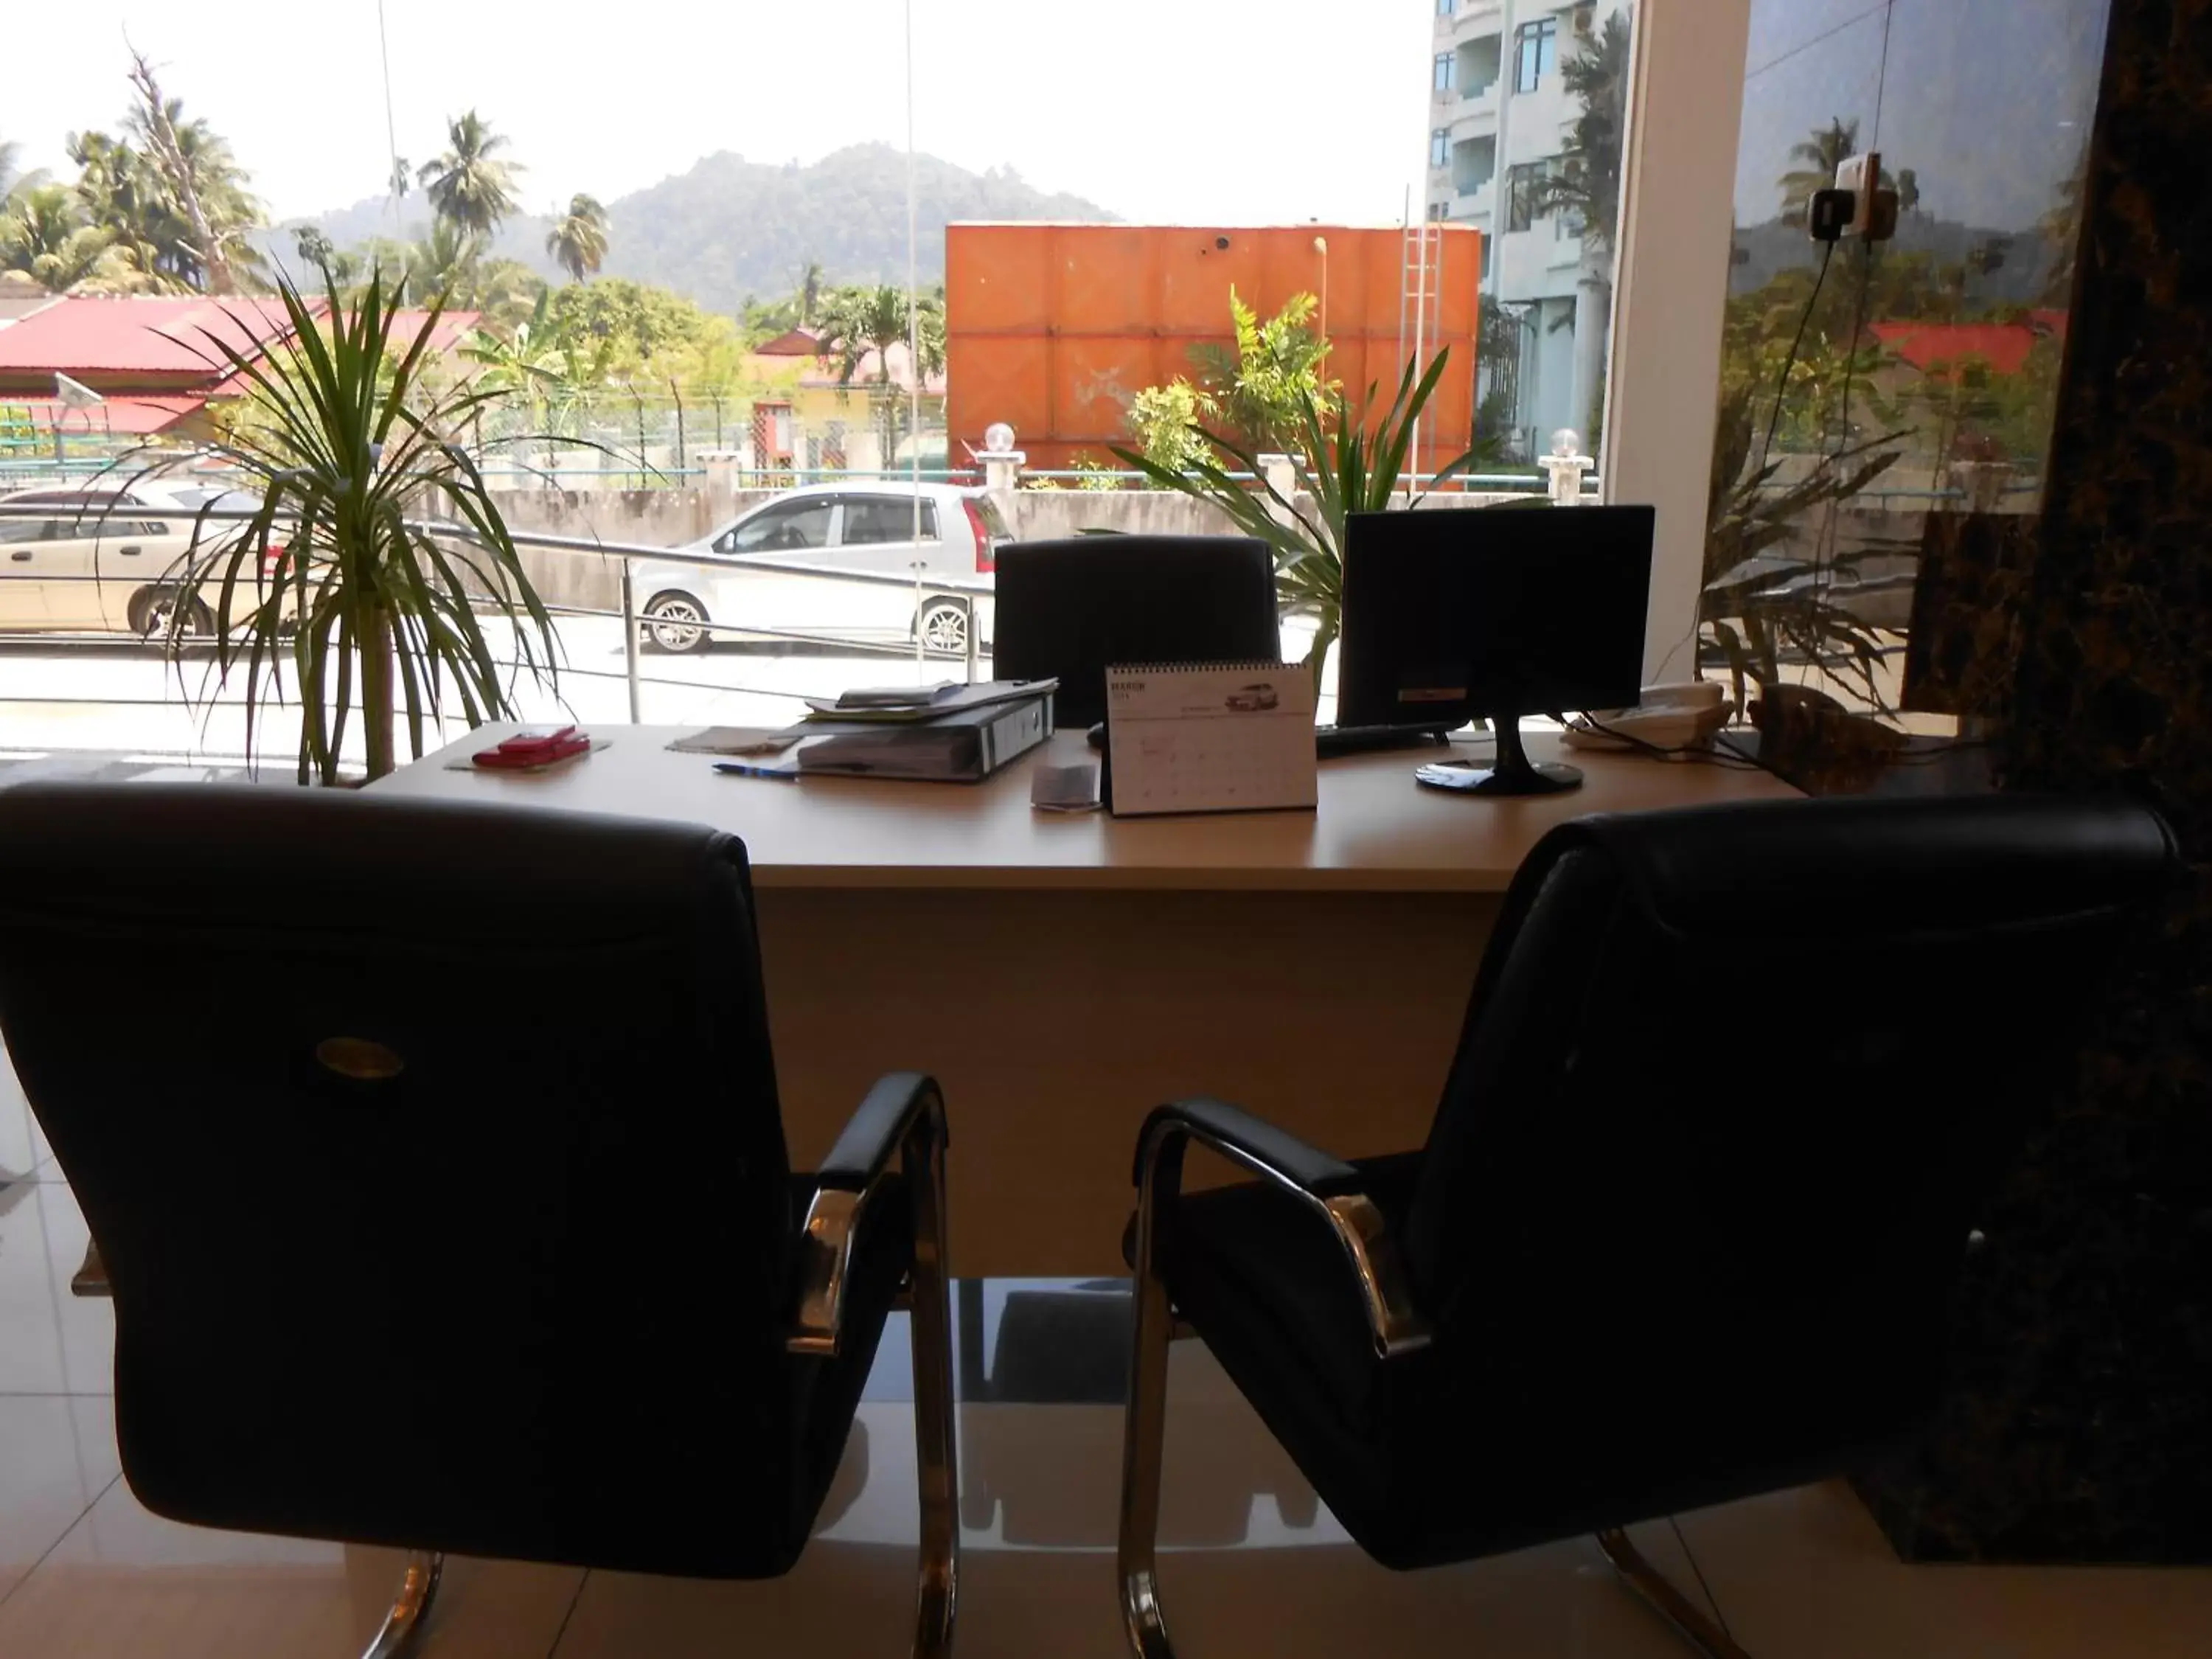 Business facilities, View in HIG Hotel